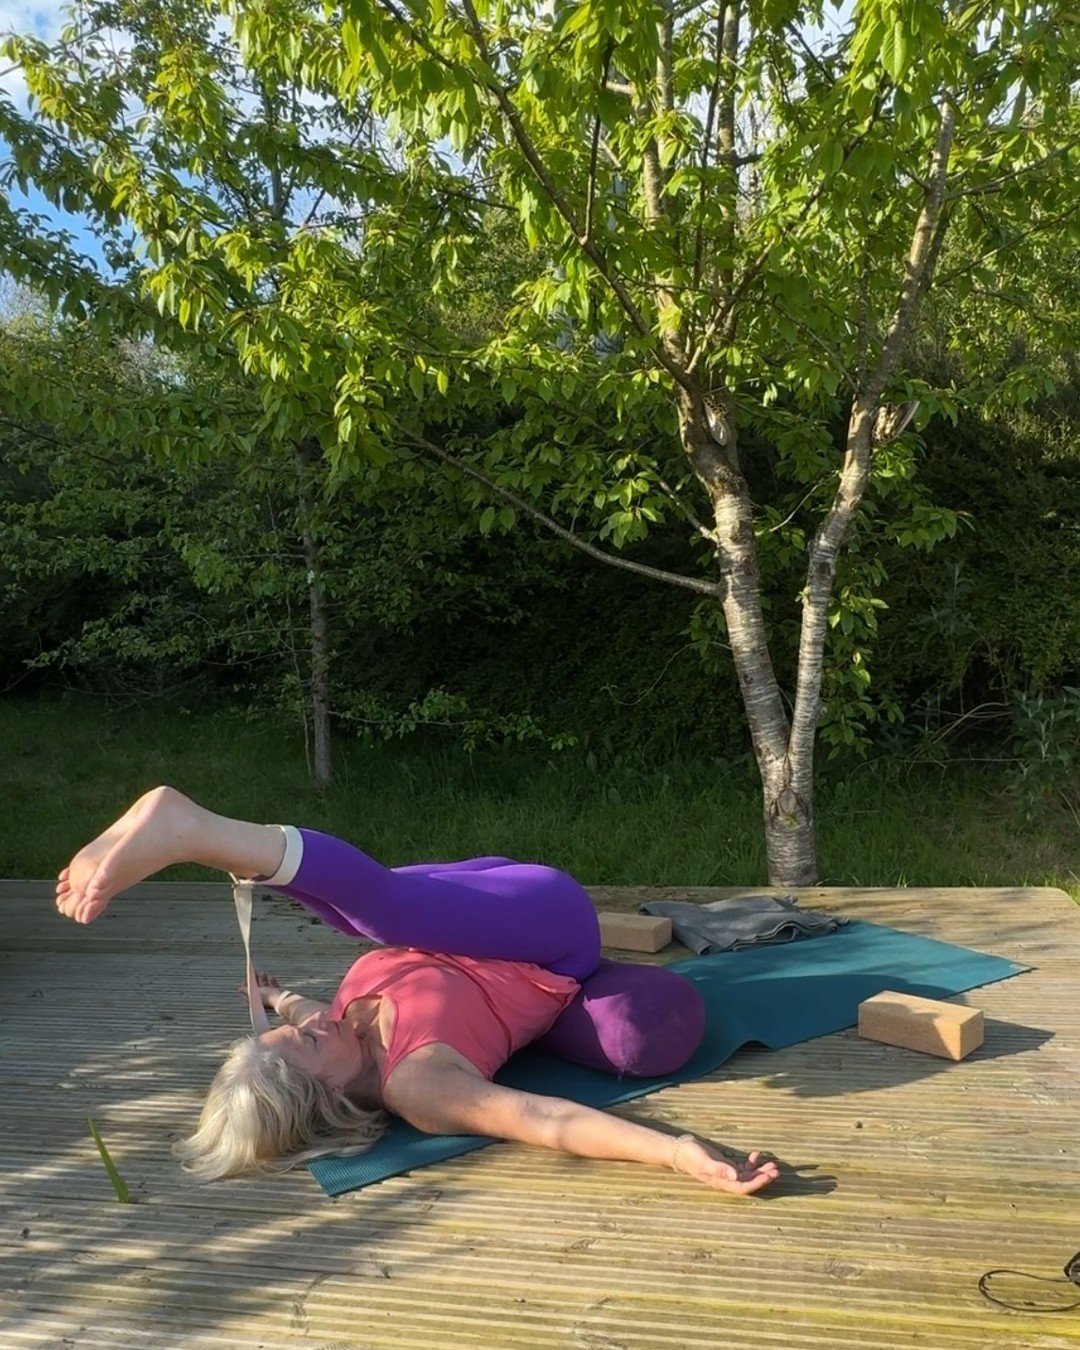 Overdone it in the garden this weekend &amp; my back is wondering what the hell happened! 
Plenty of stretches like these for me although sadly not in the sunshine today. 

Support from the bolster &amp; maintaining stability in the sacro-iliac joint